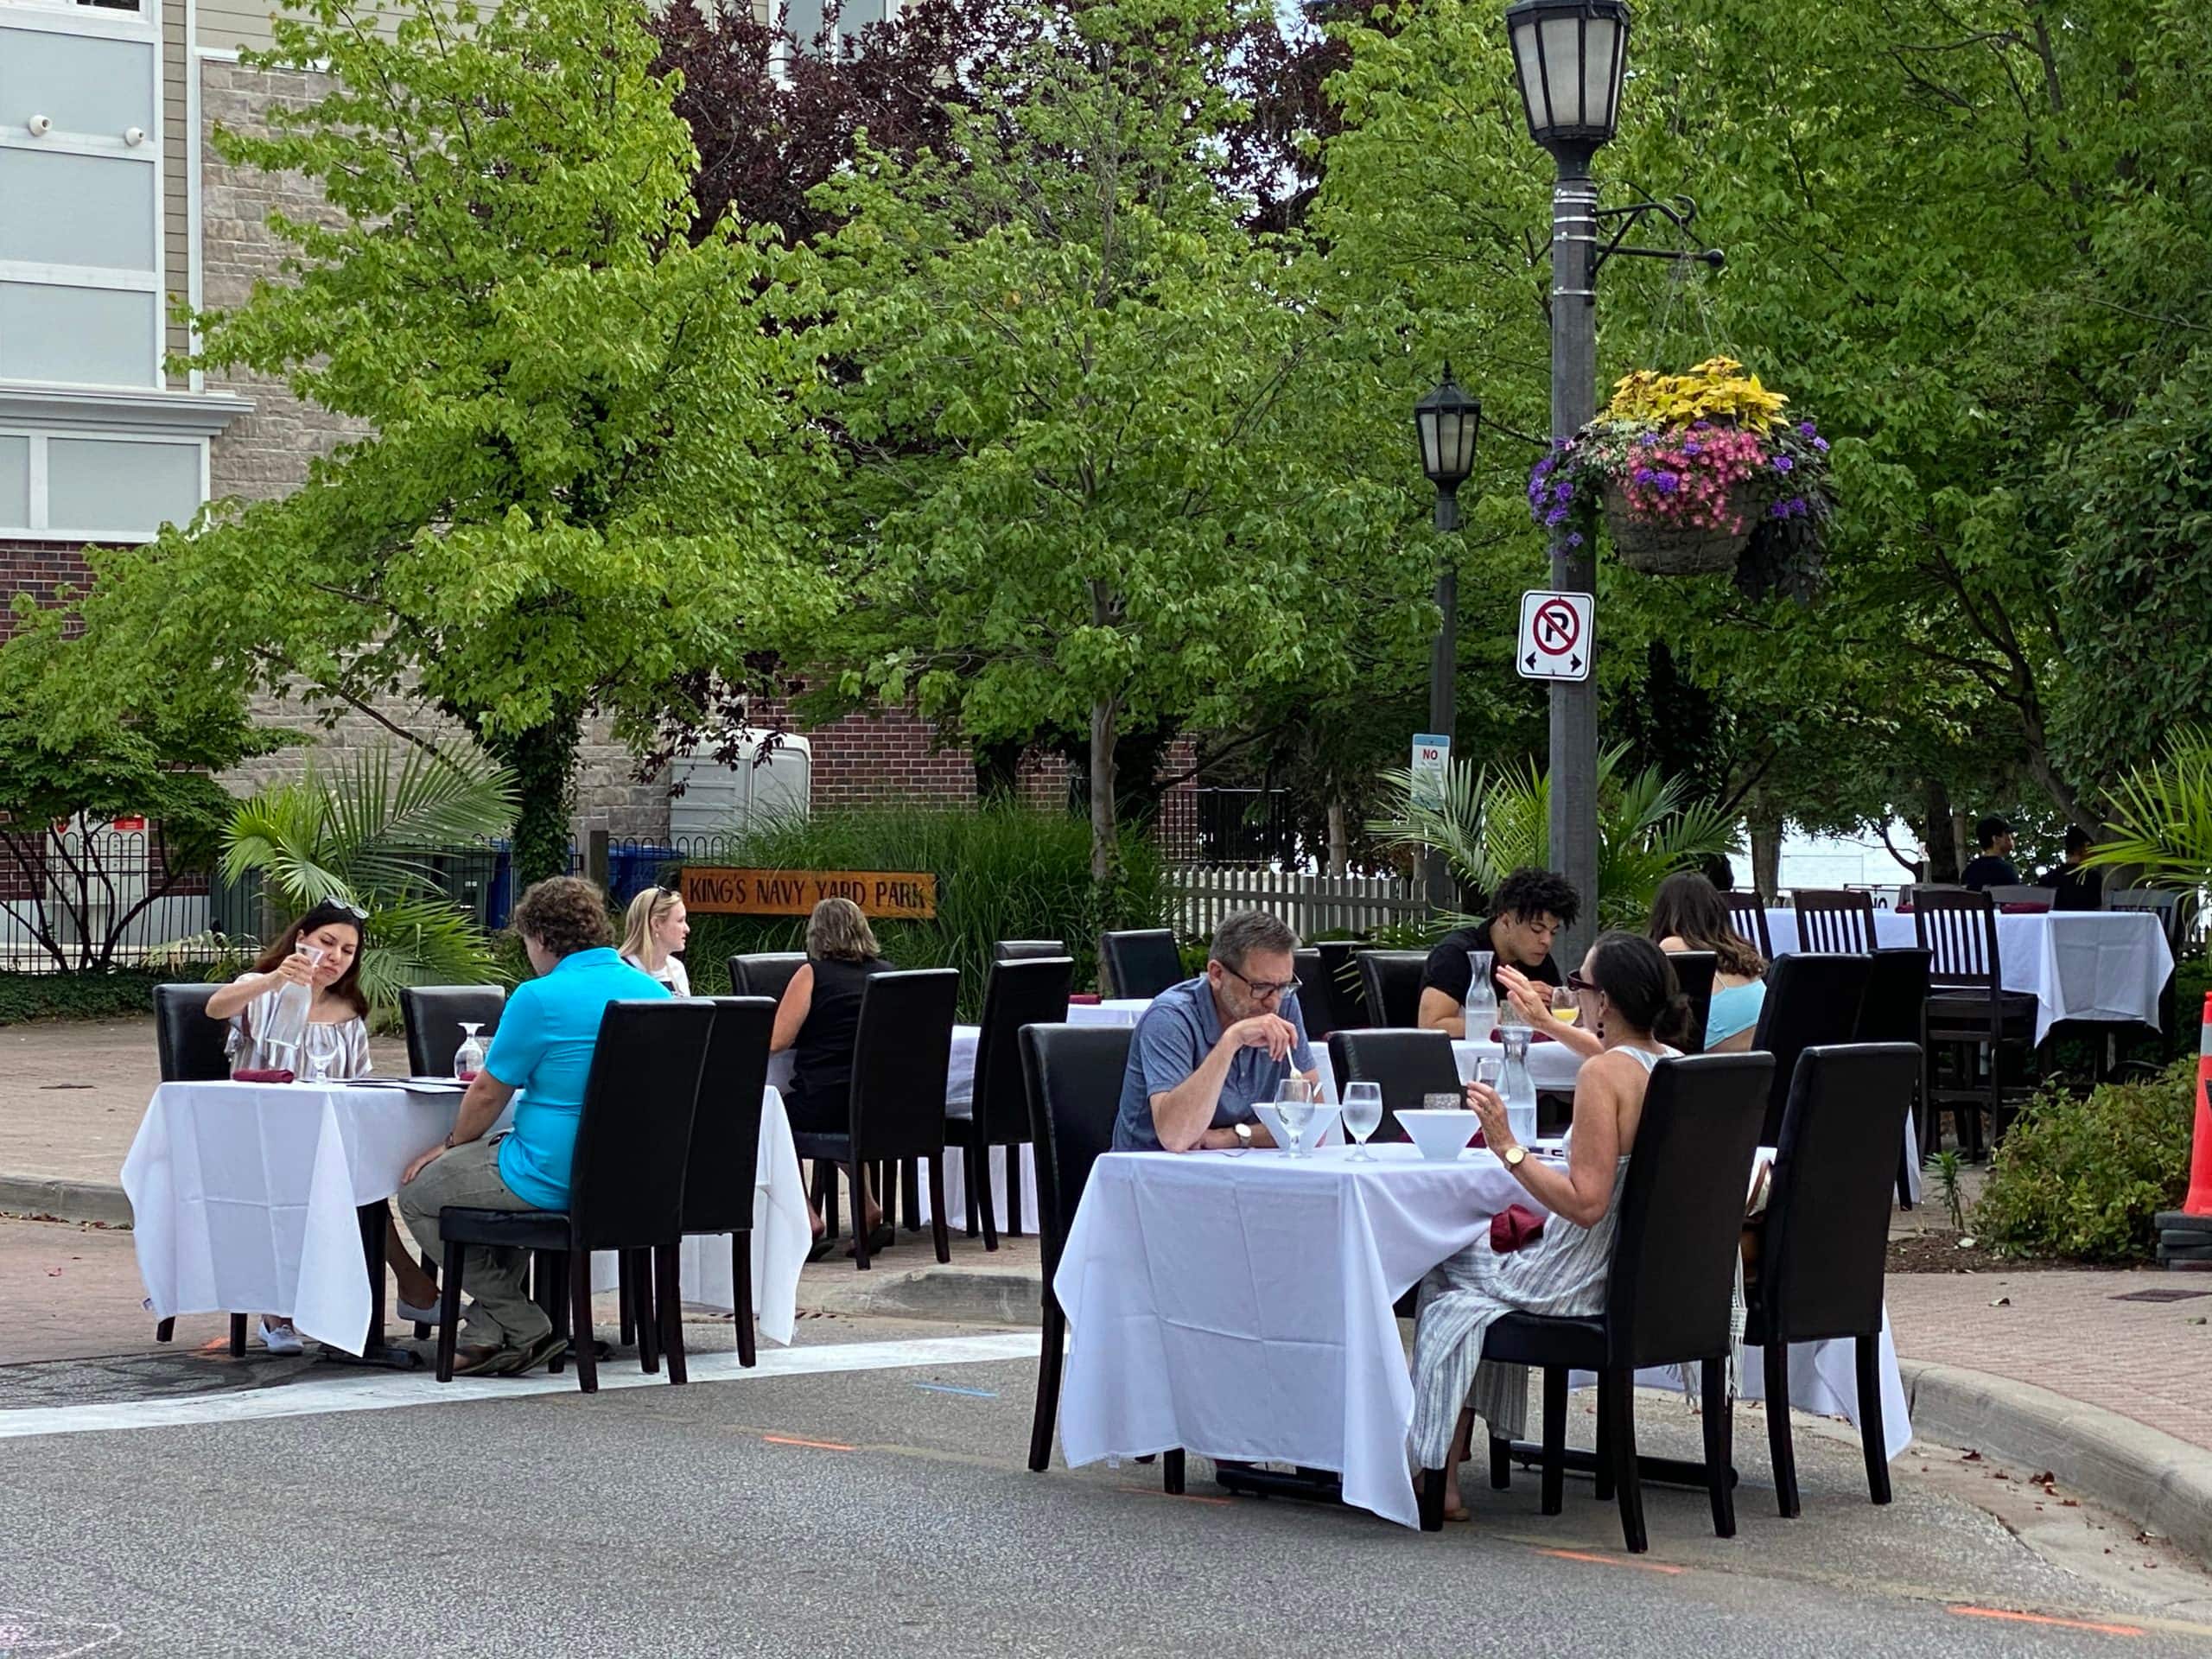 People dining outside.